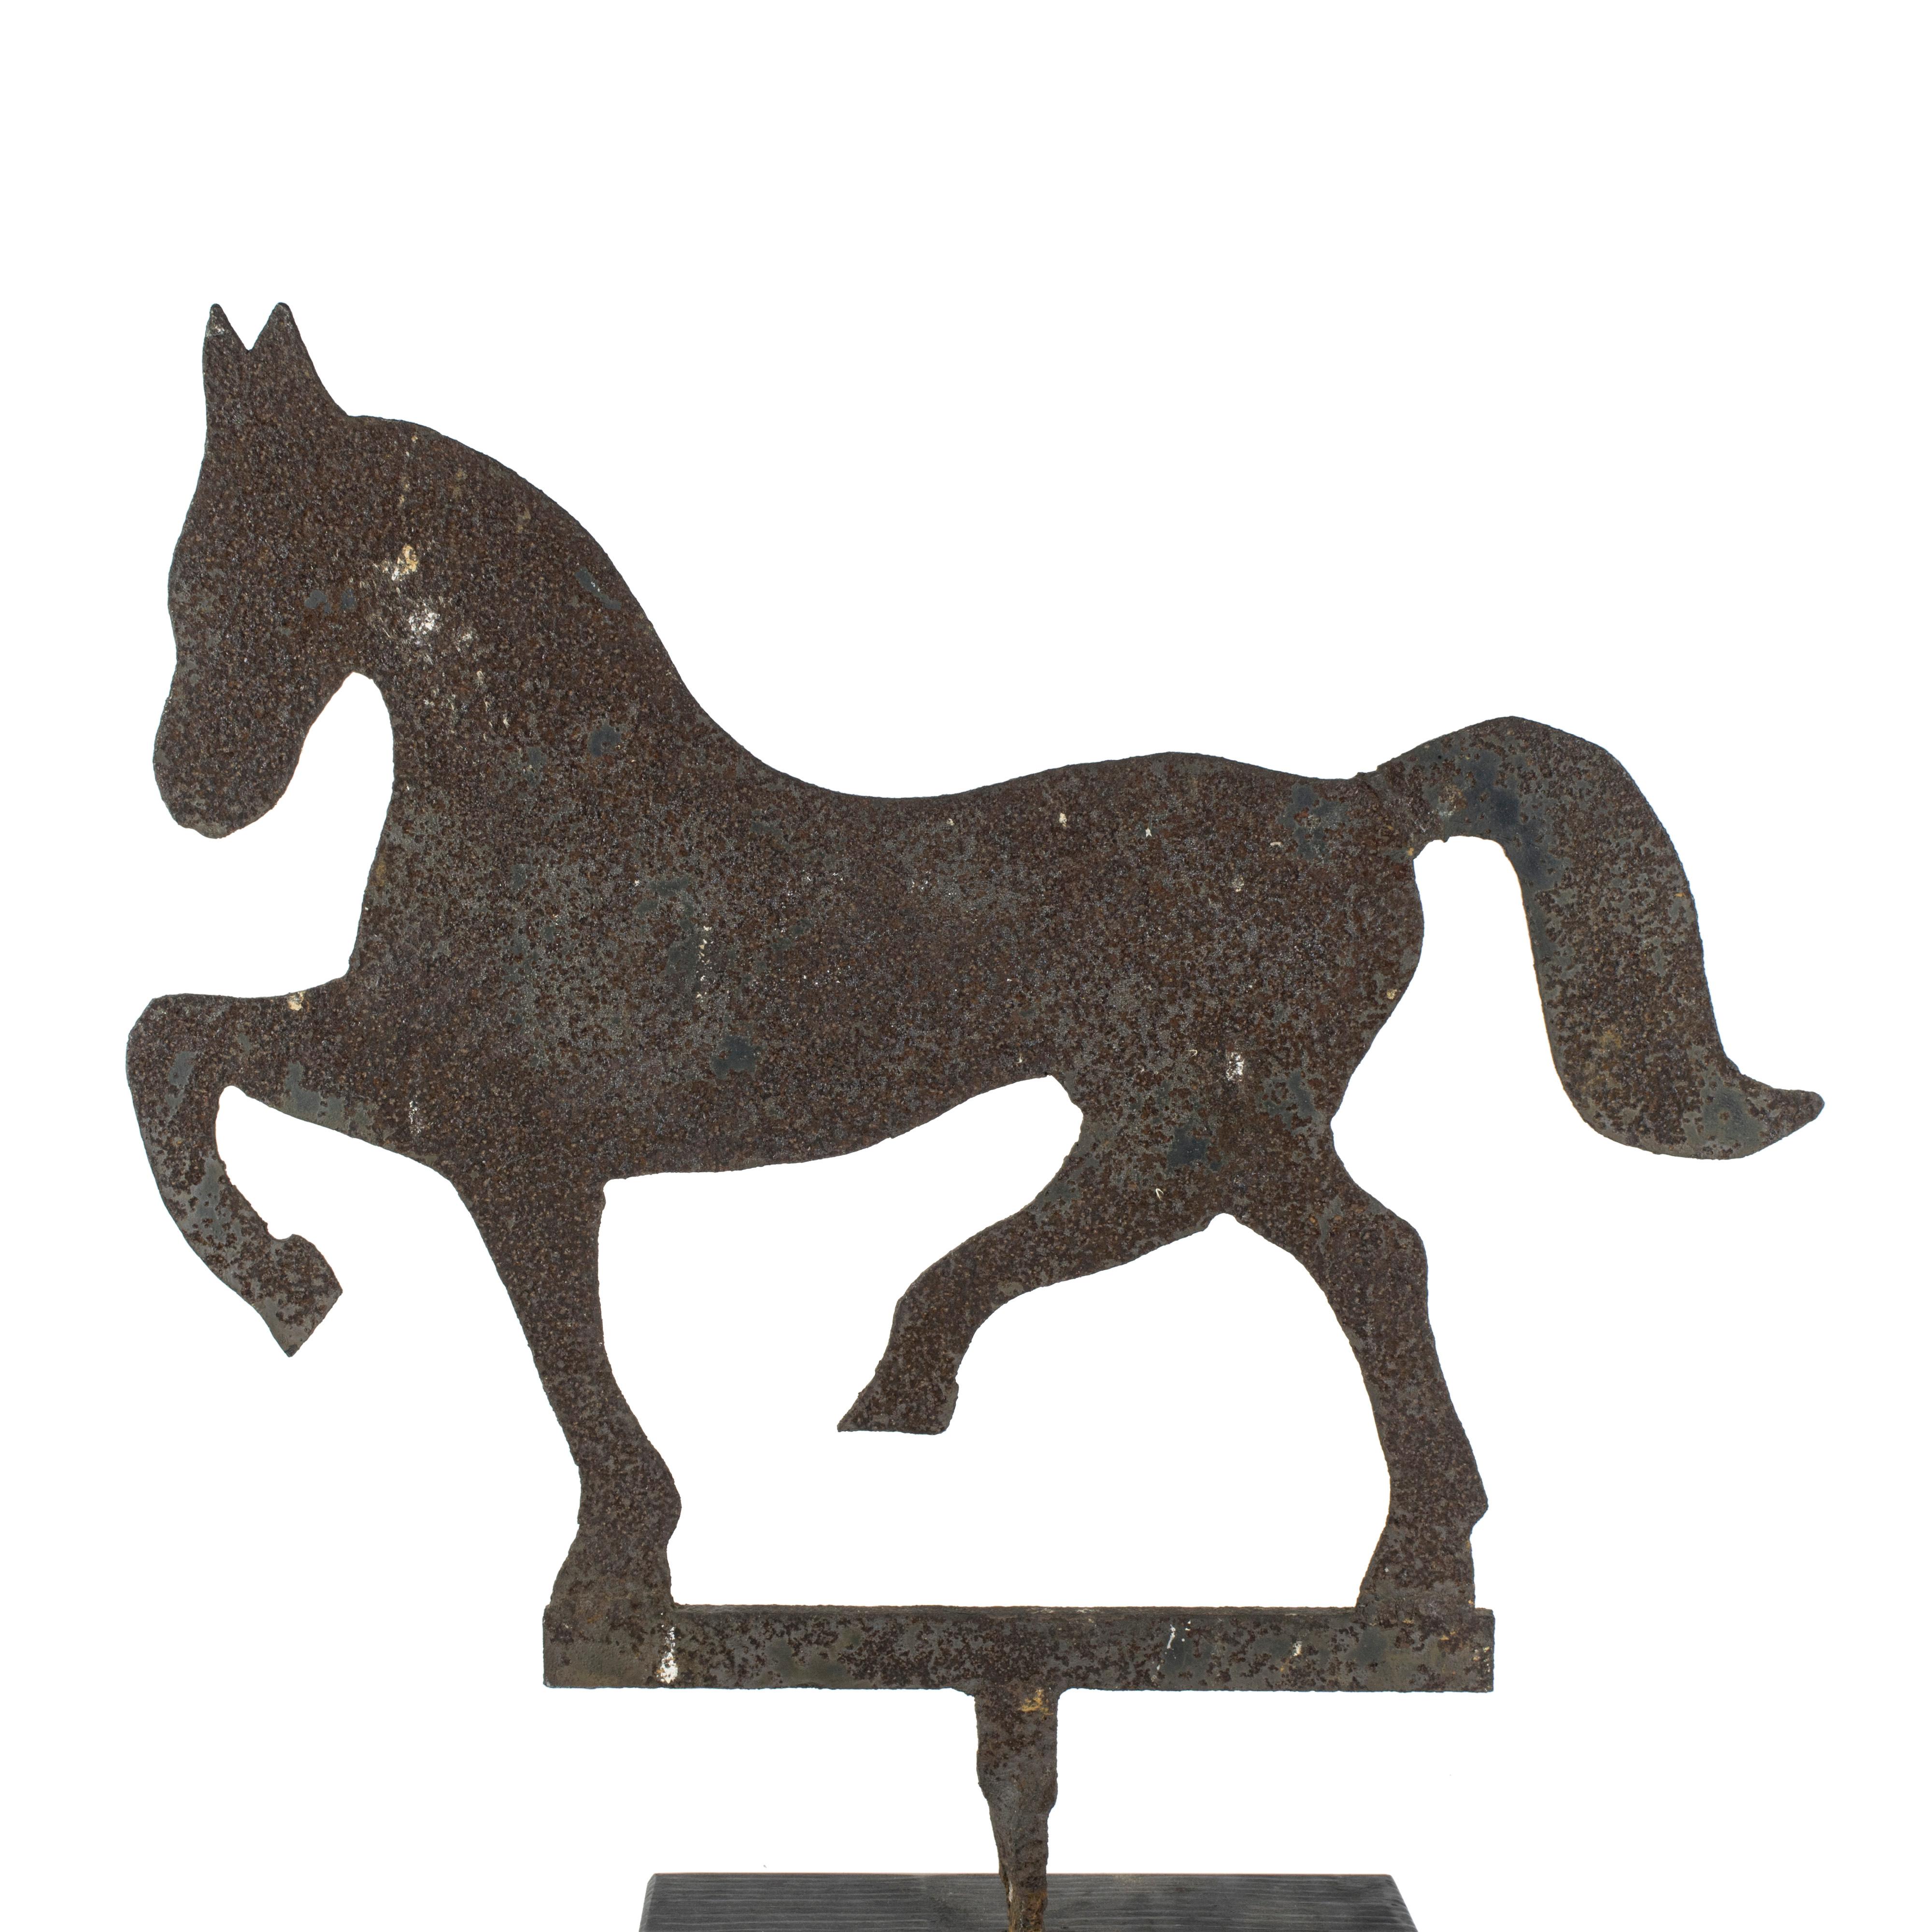 American horse silhouette Folk Art stabile sign from the early 20th century. Sheet iron cutout of a prancing horse. Not sure of use, we think stabile sign.

Period: First quarter 20th century
Origin: US
Size: 24